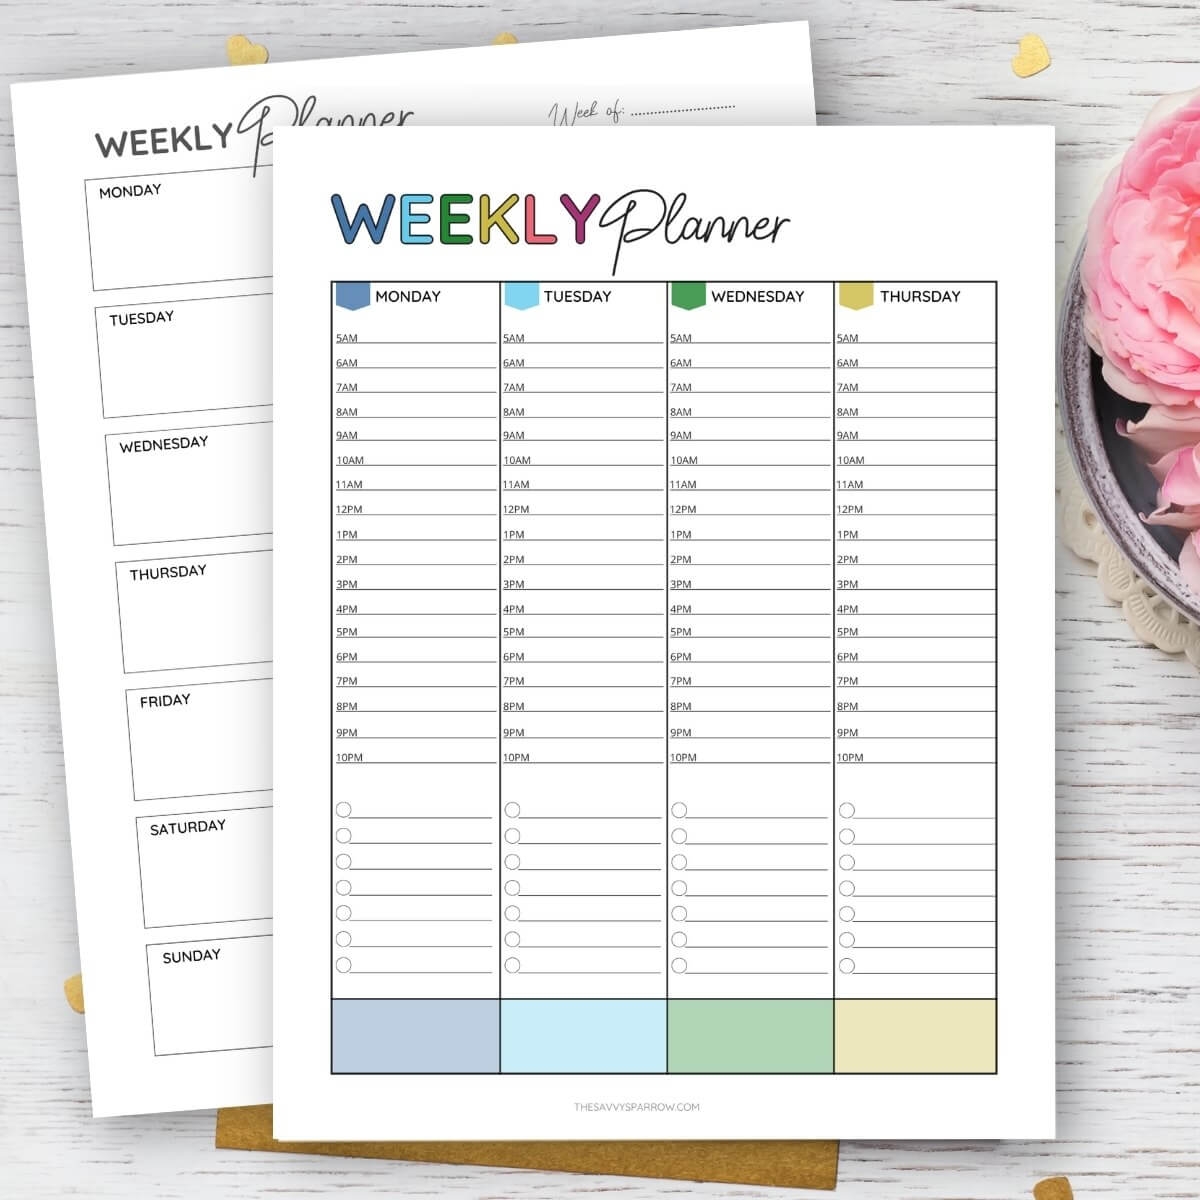 Free Printable Weekly Planner Templates To Help You Schedule Your Life - Free Printable Blank Weekly Schedule